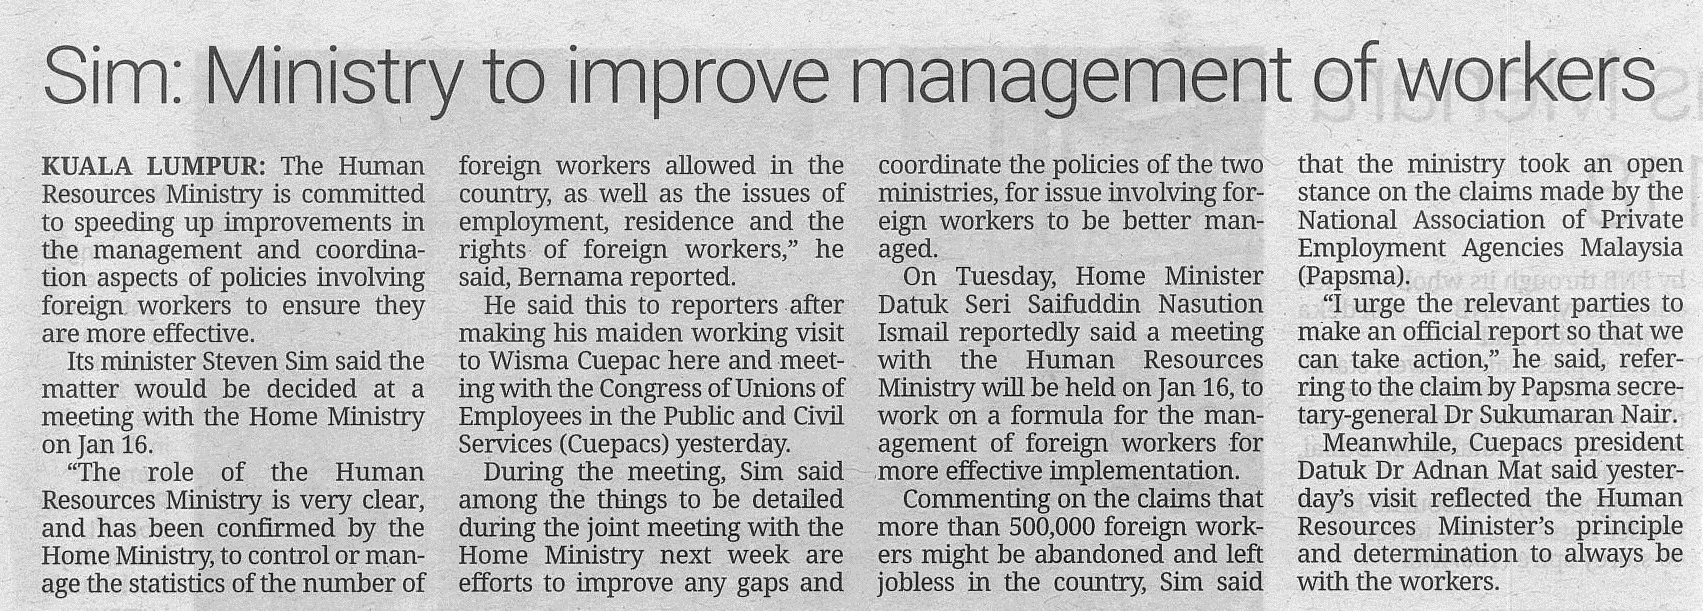 sim: Ministry to improve management of workers